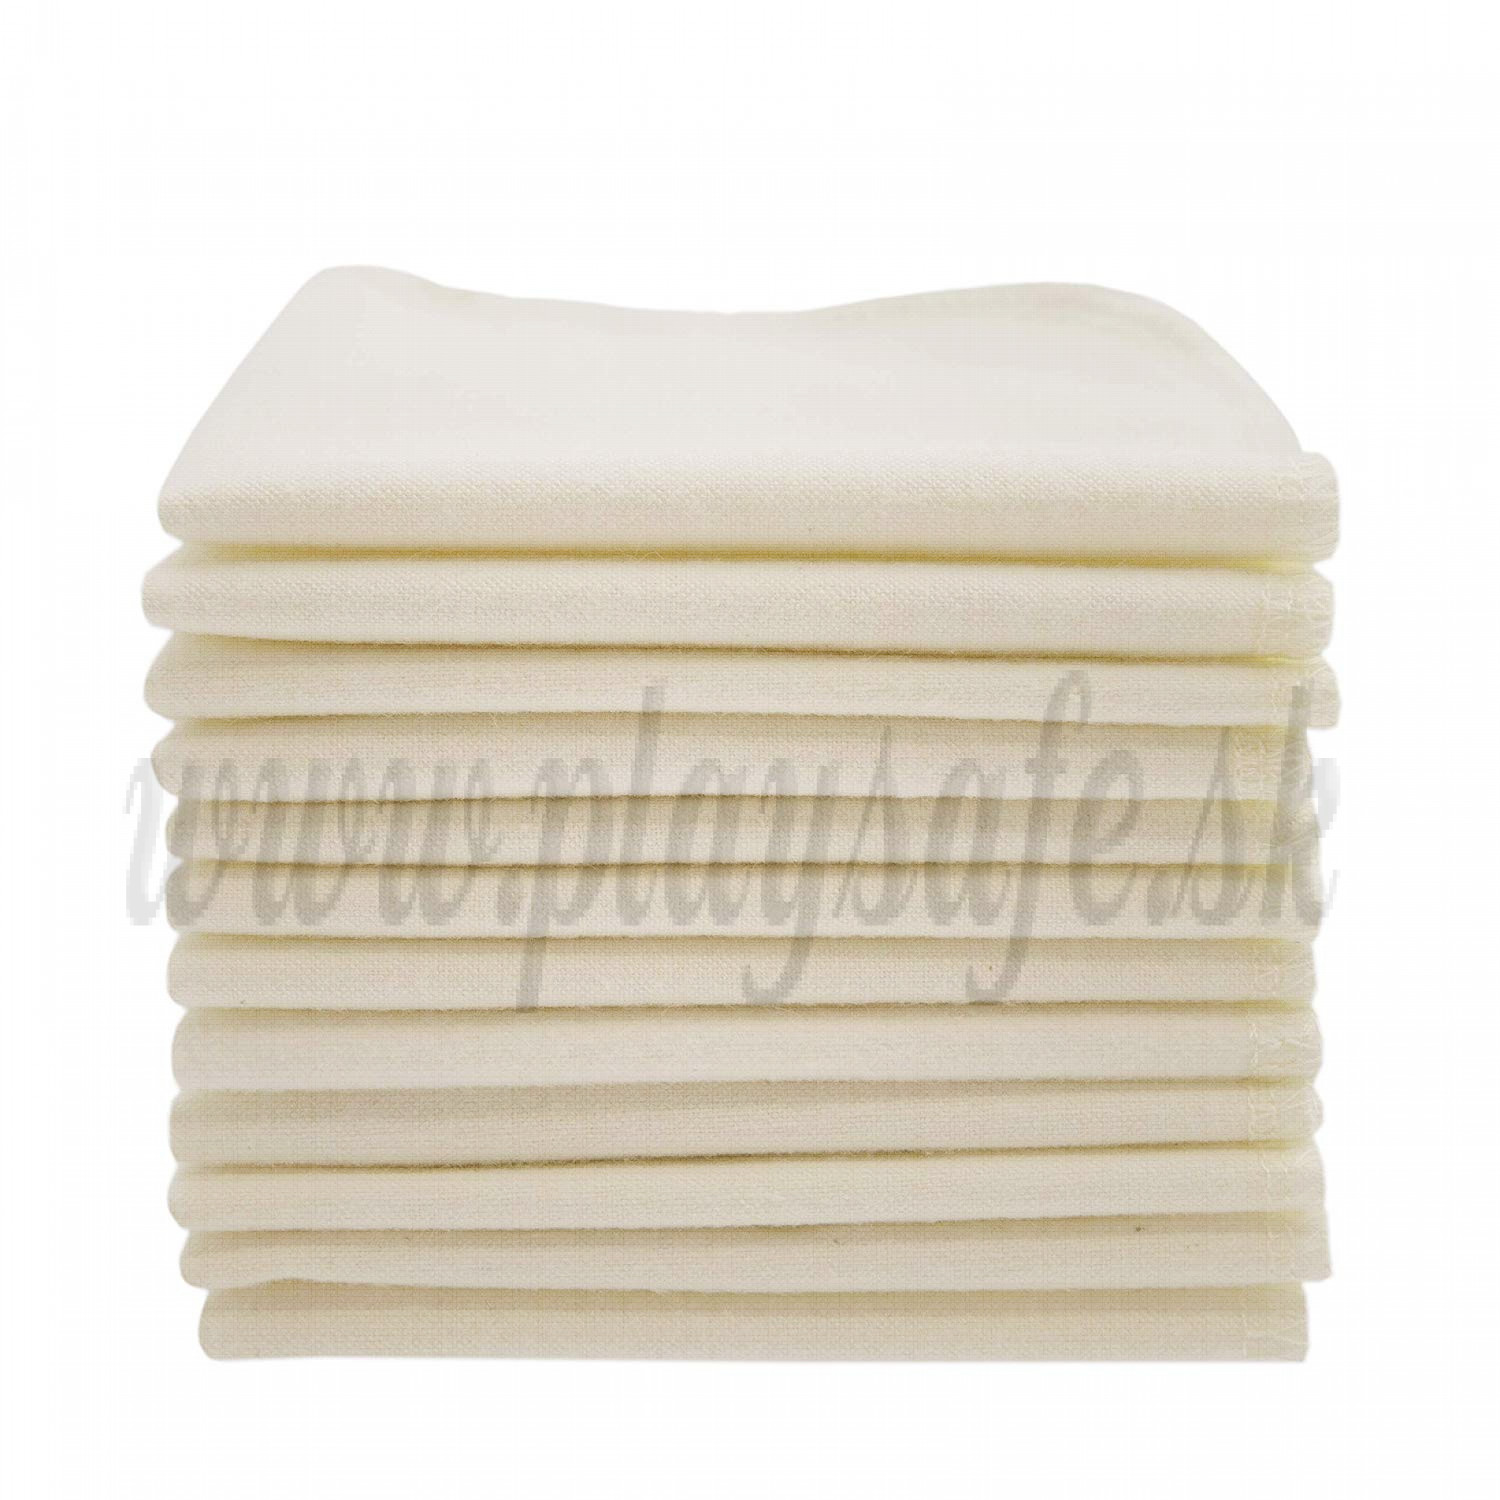 Imse Vimse Cloth Wipes organic cotton, 12 pieces natural